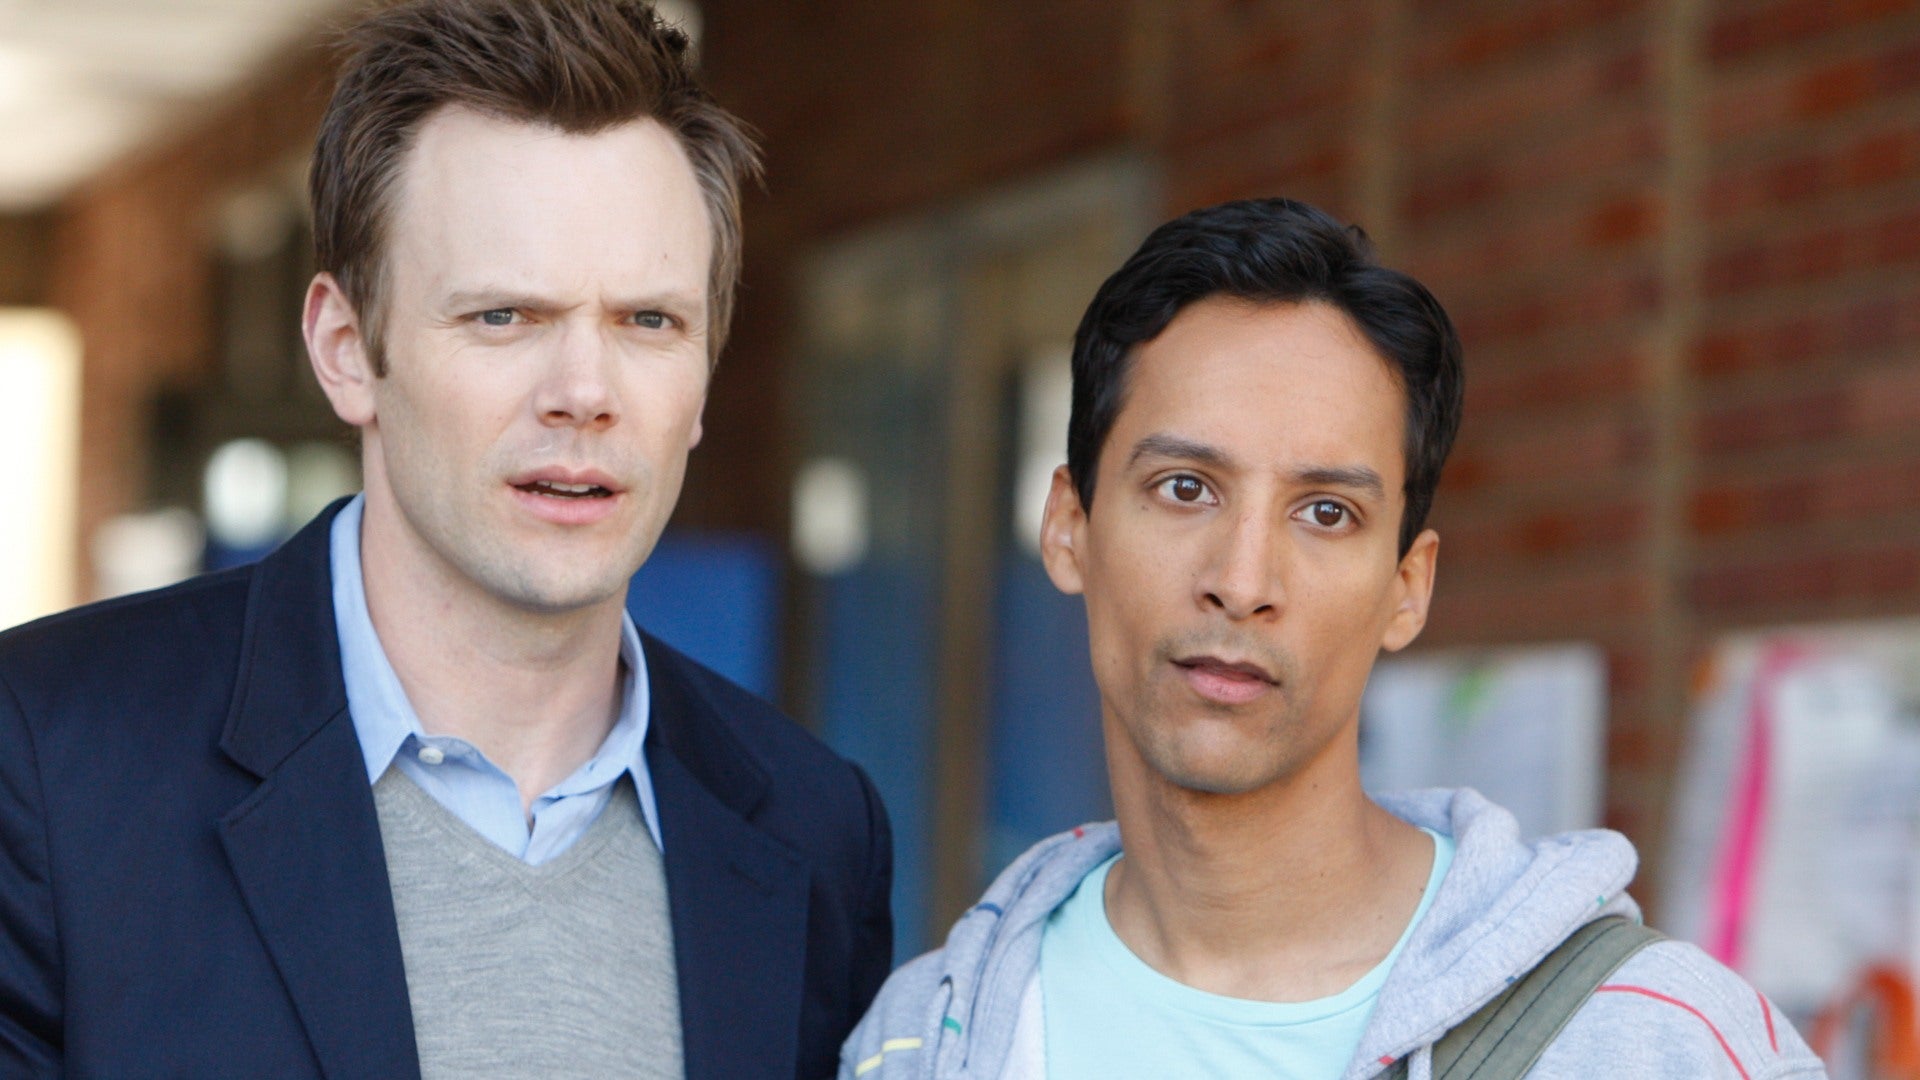 Community creator and cast reflect as cult sitcom arrives on Netflix, The  Independent